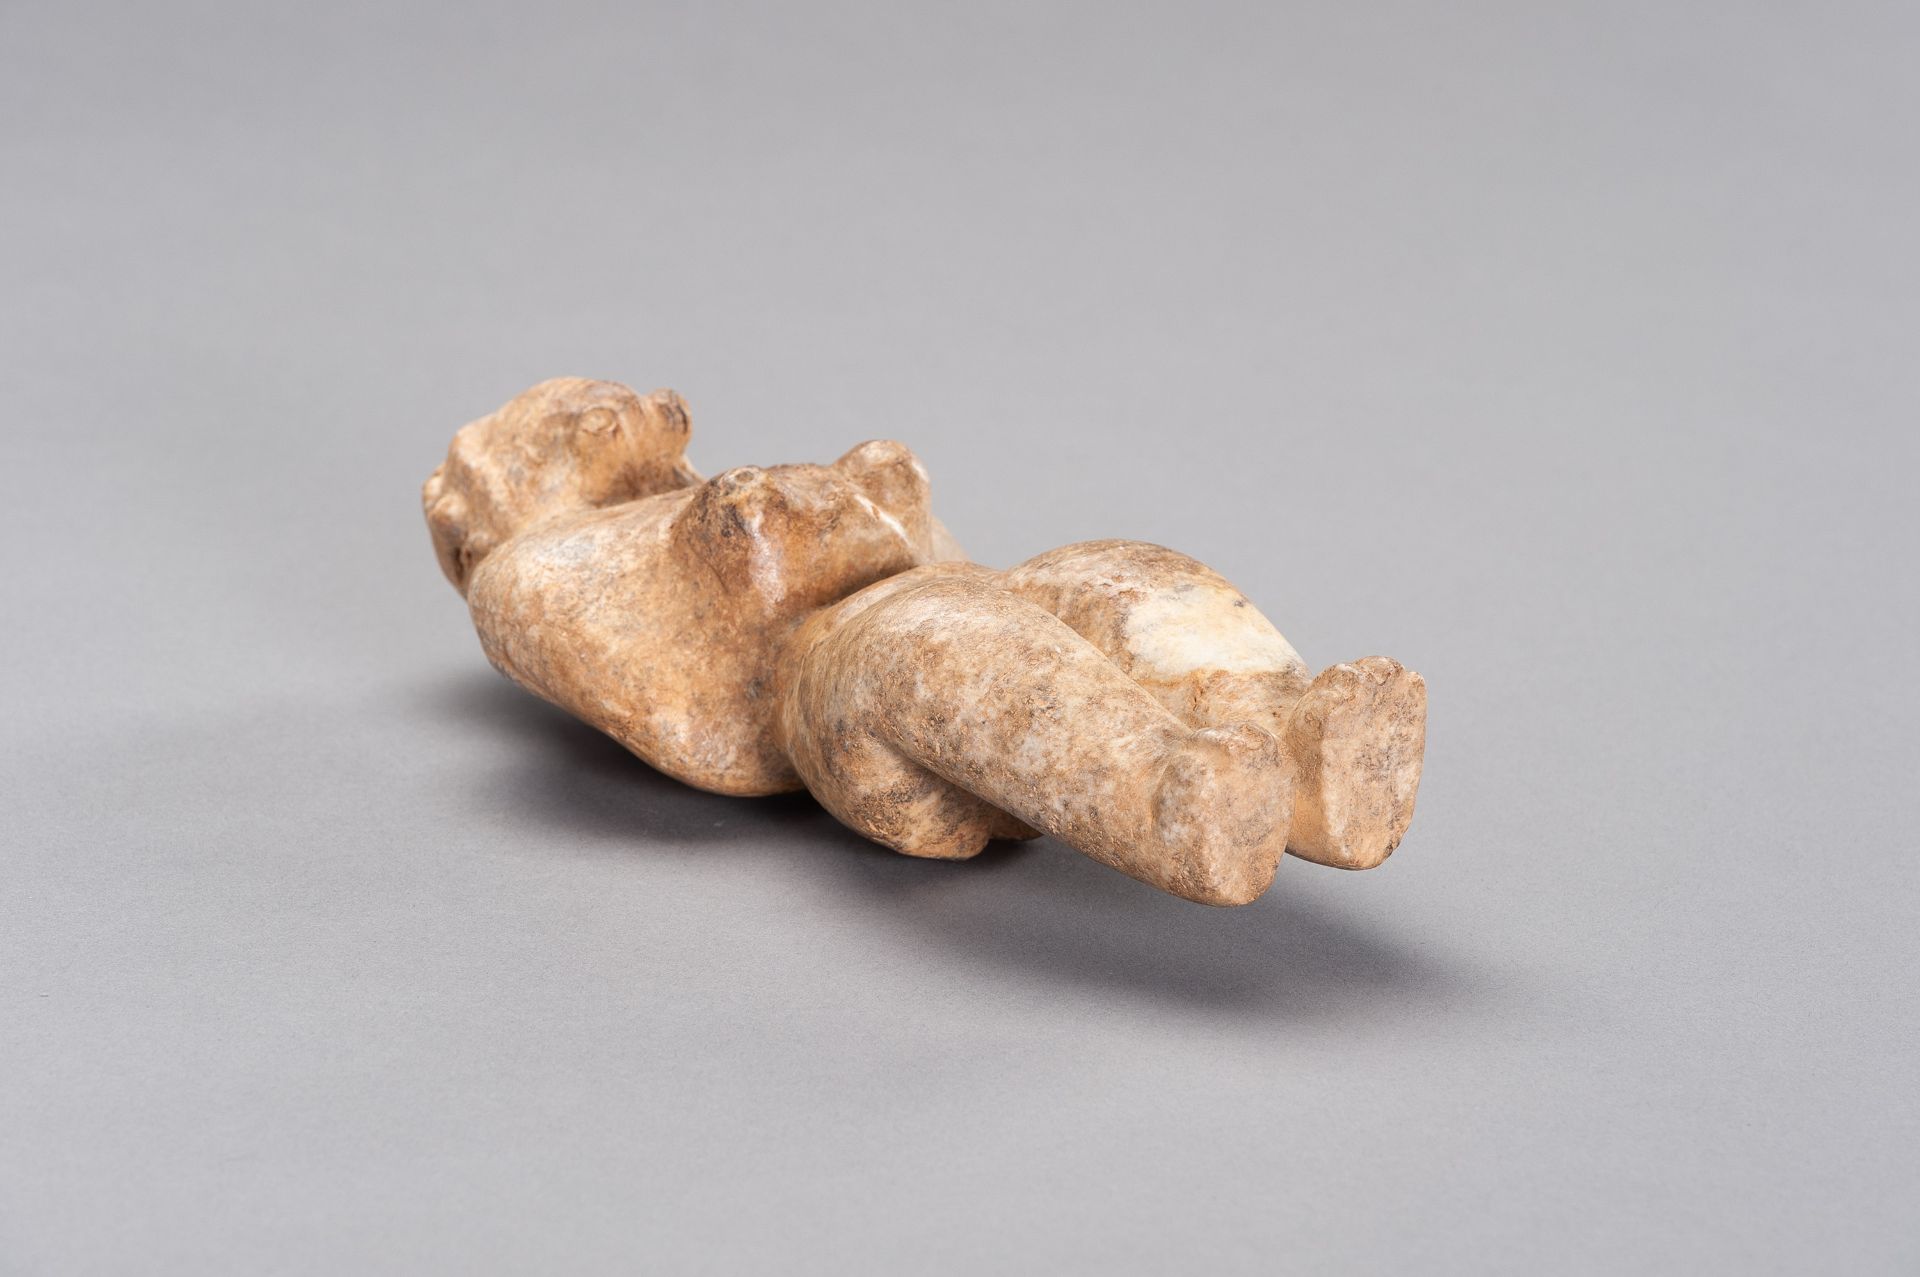 AN INDUS VALLEY STYLE STONE FIGURE OF A FERTILITY GODDESS - Image 8 of 9